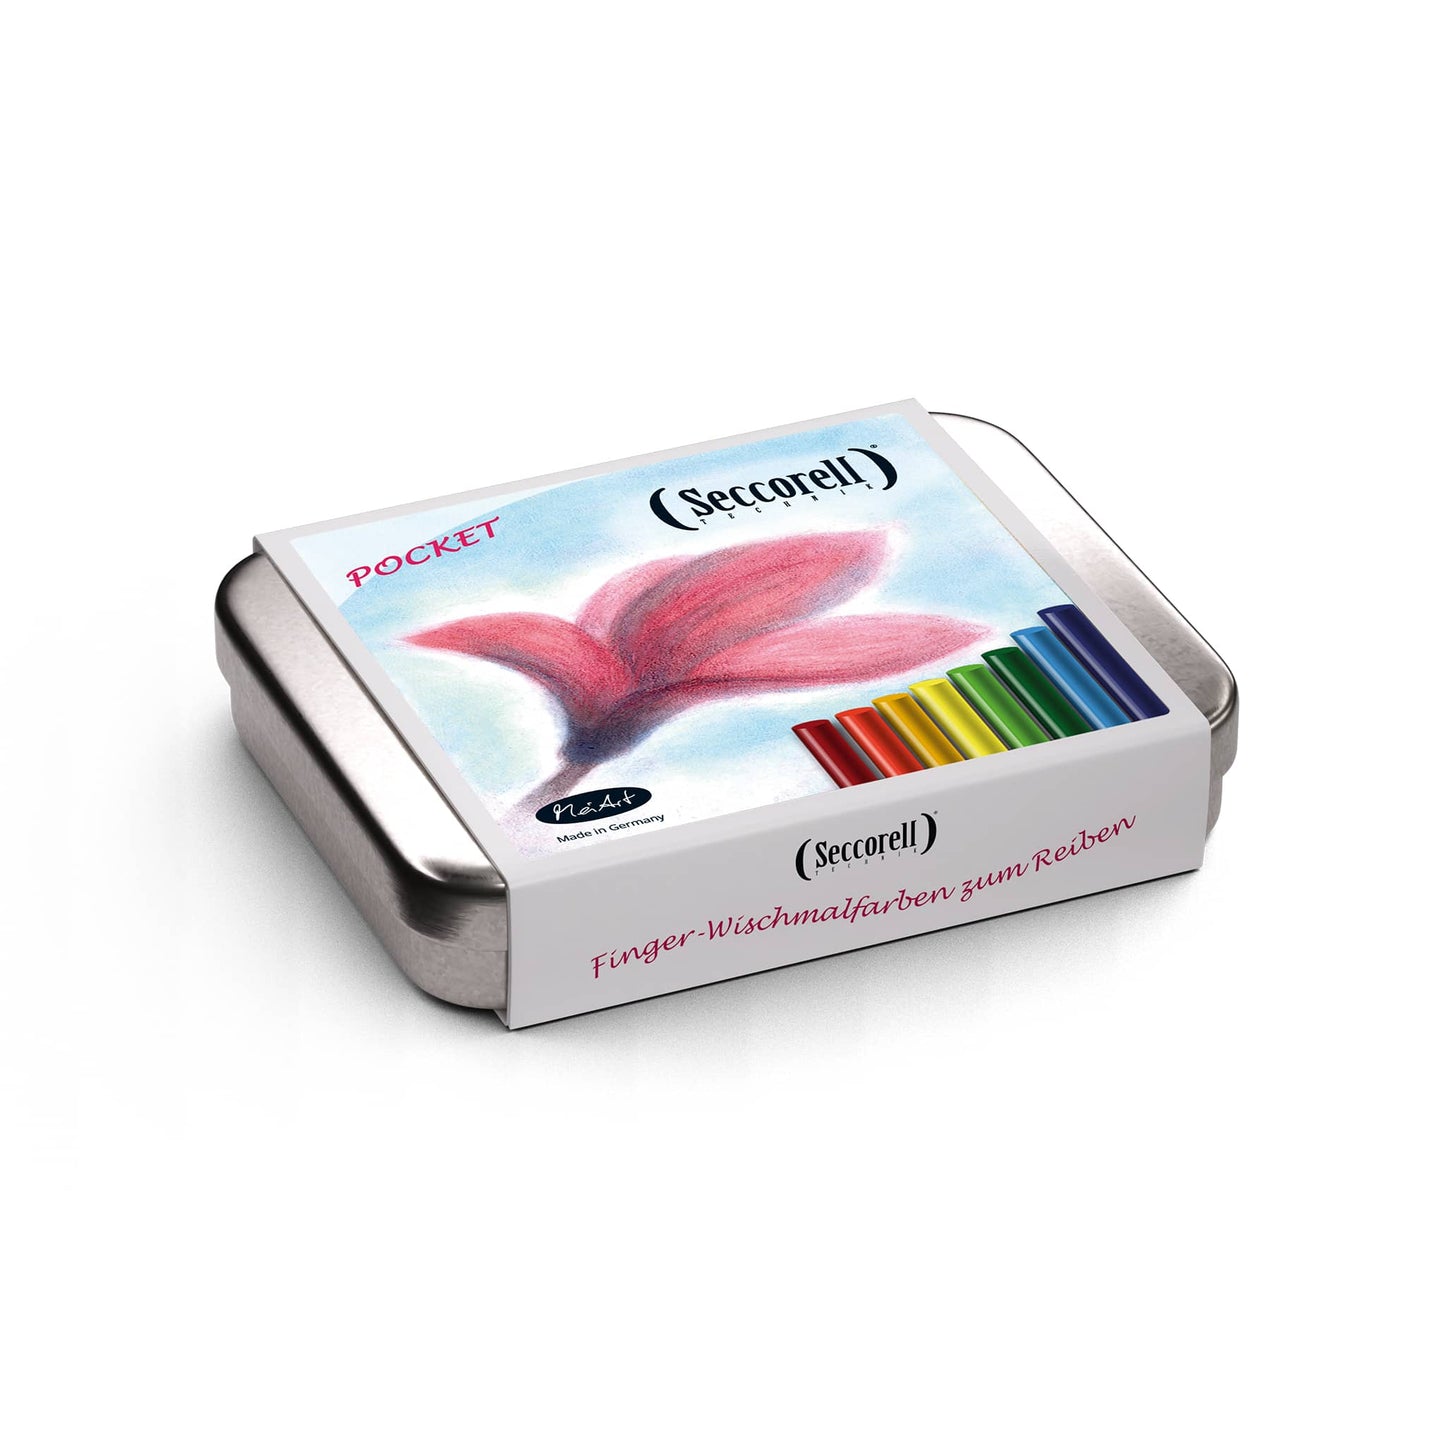 Seccorell Pocket "Magnolia Blossom", a small painting set that comes in a metal tin for creating vibrant, smudge-proof artwork on the go without water.